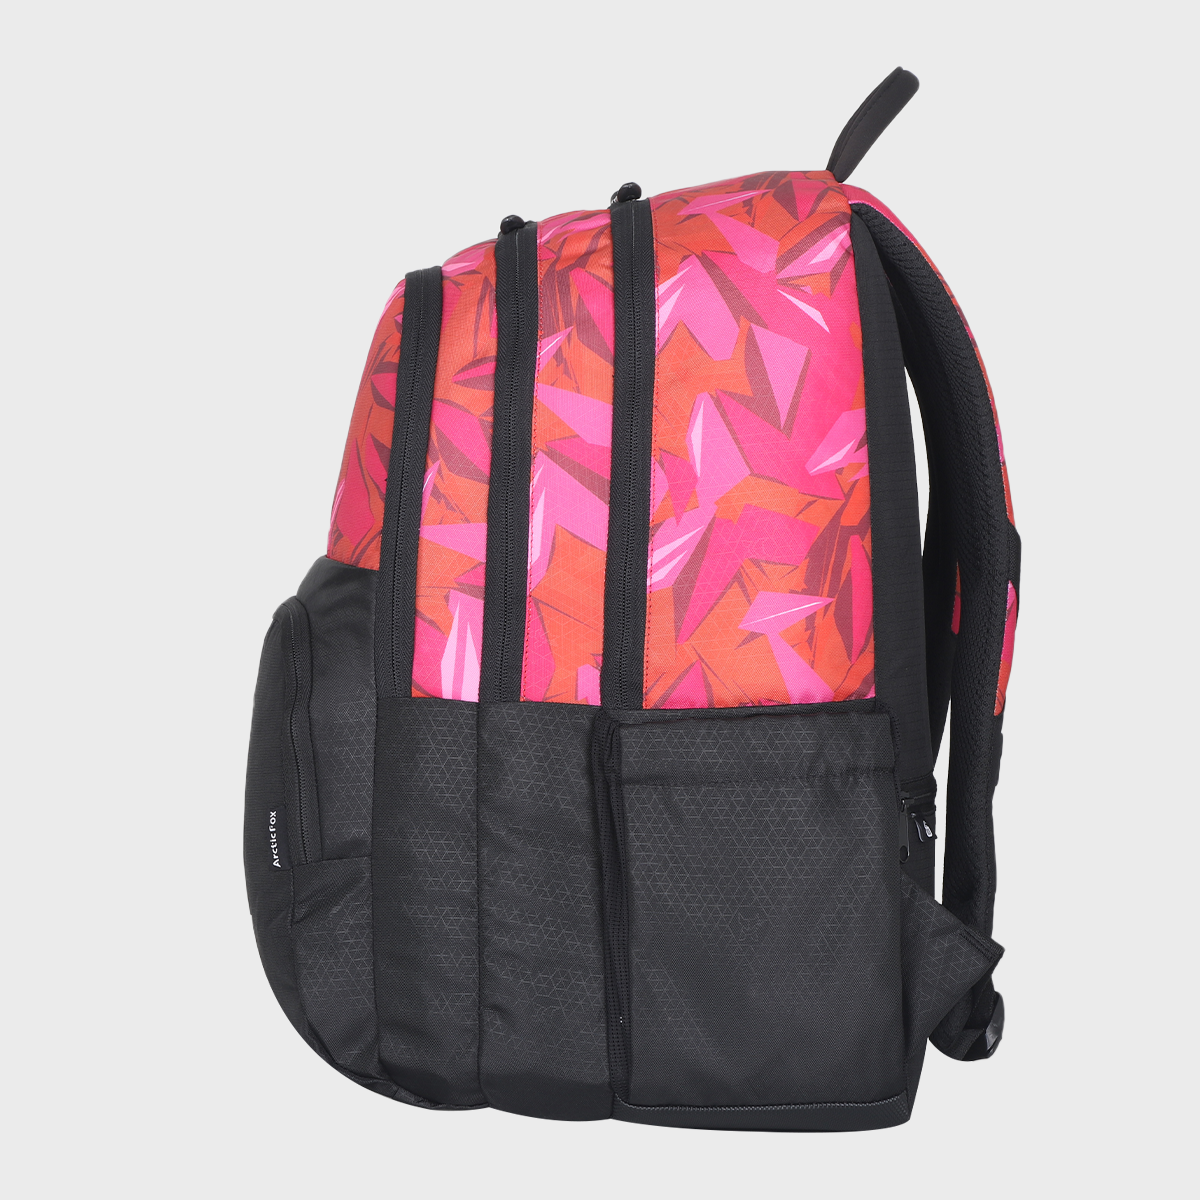 Arctic Fox Backpack for Girls and Backpack for Women Prism Red